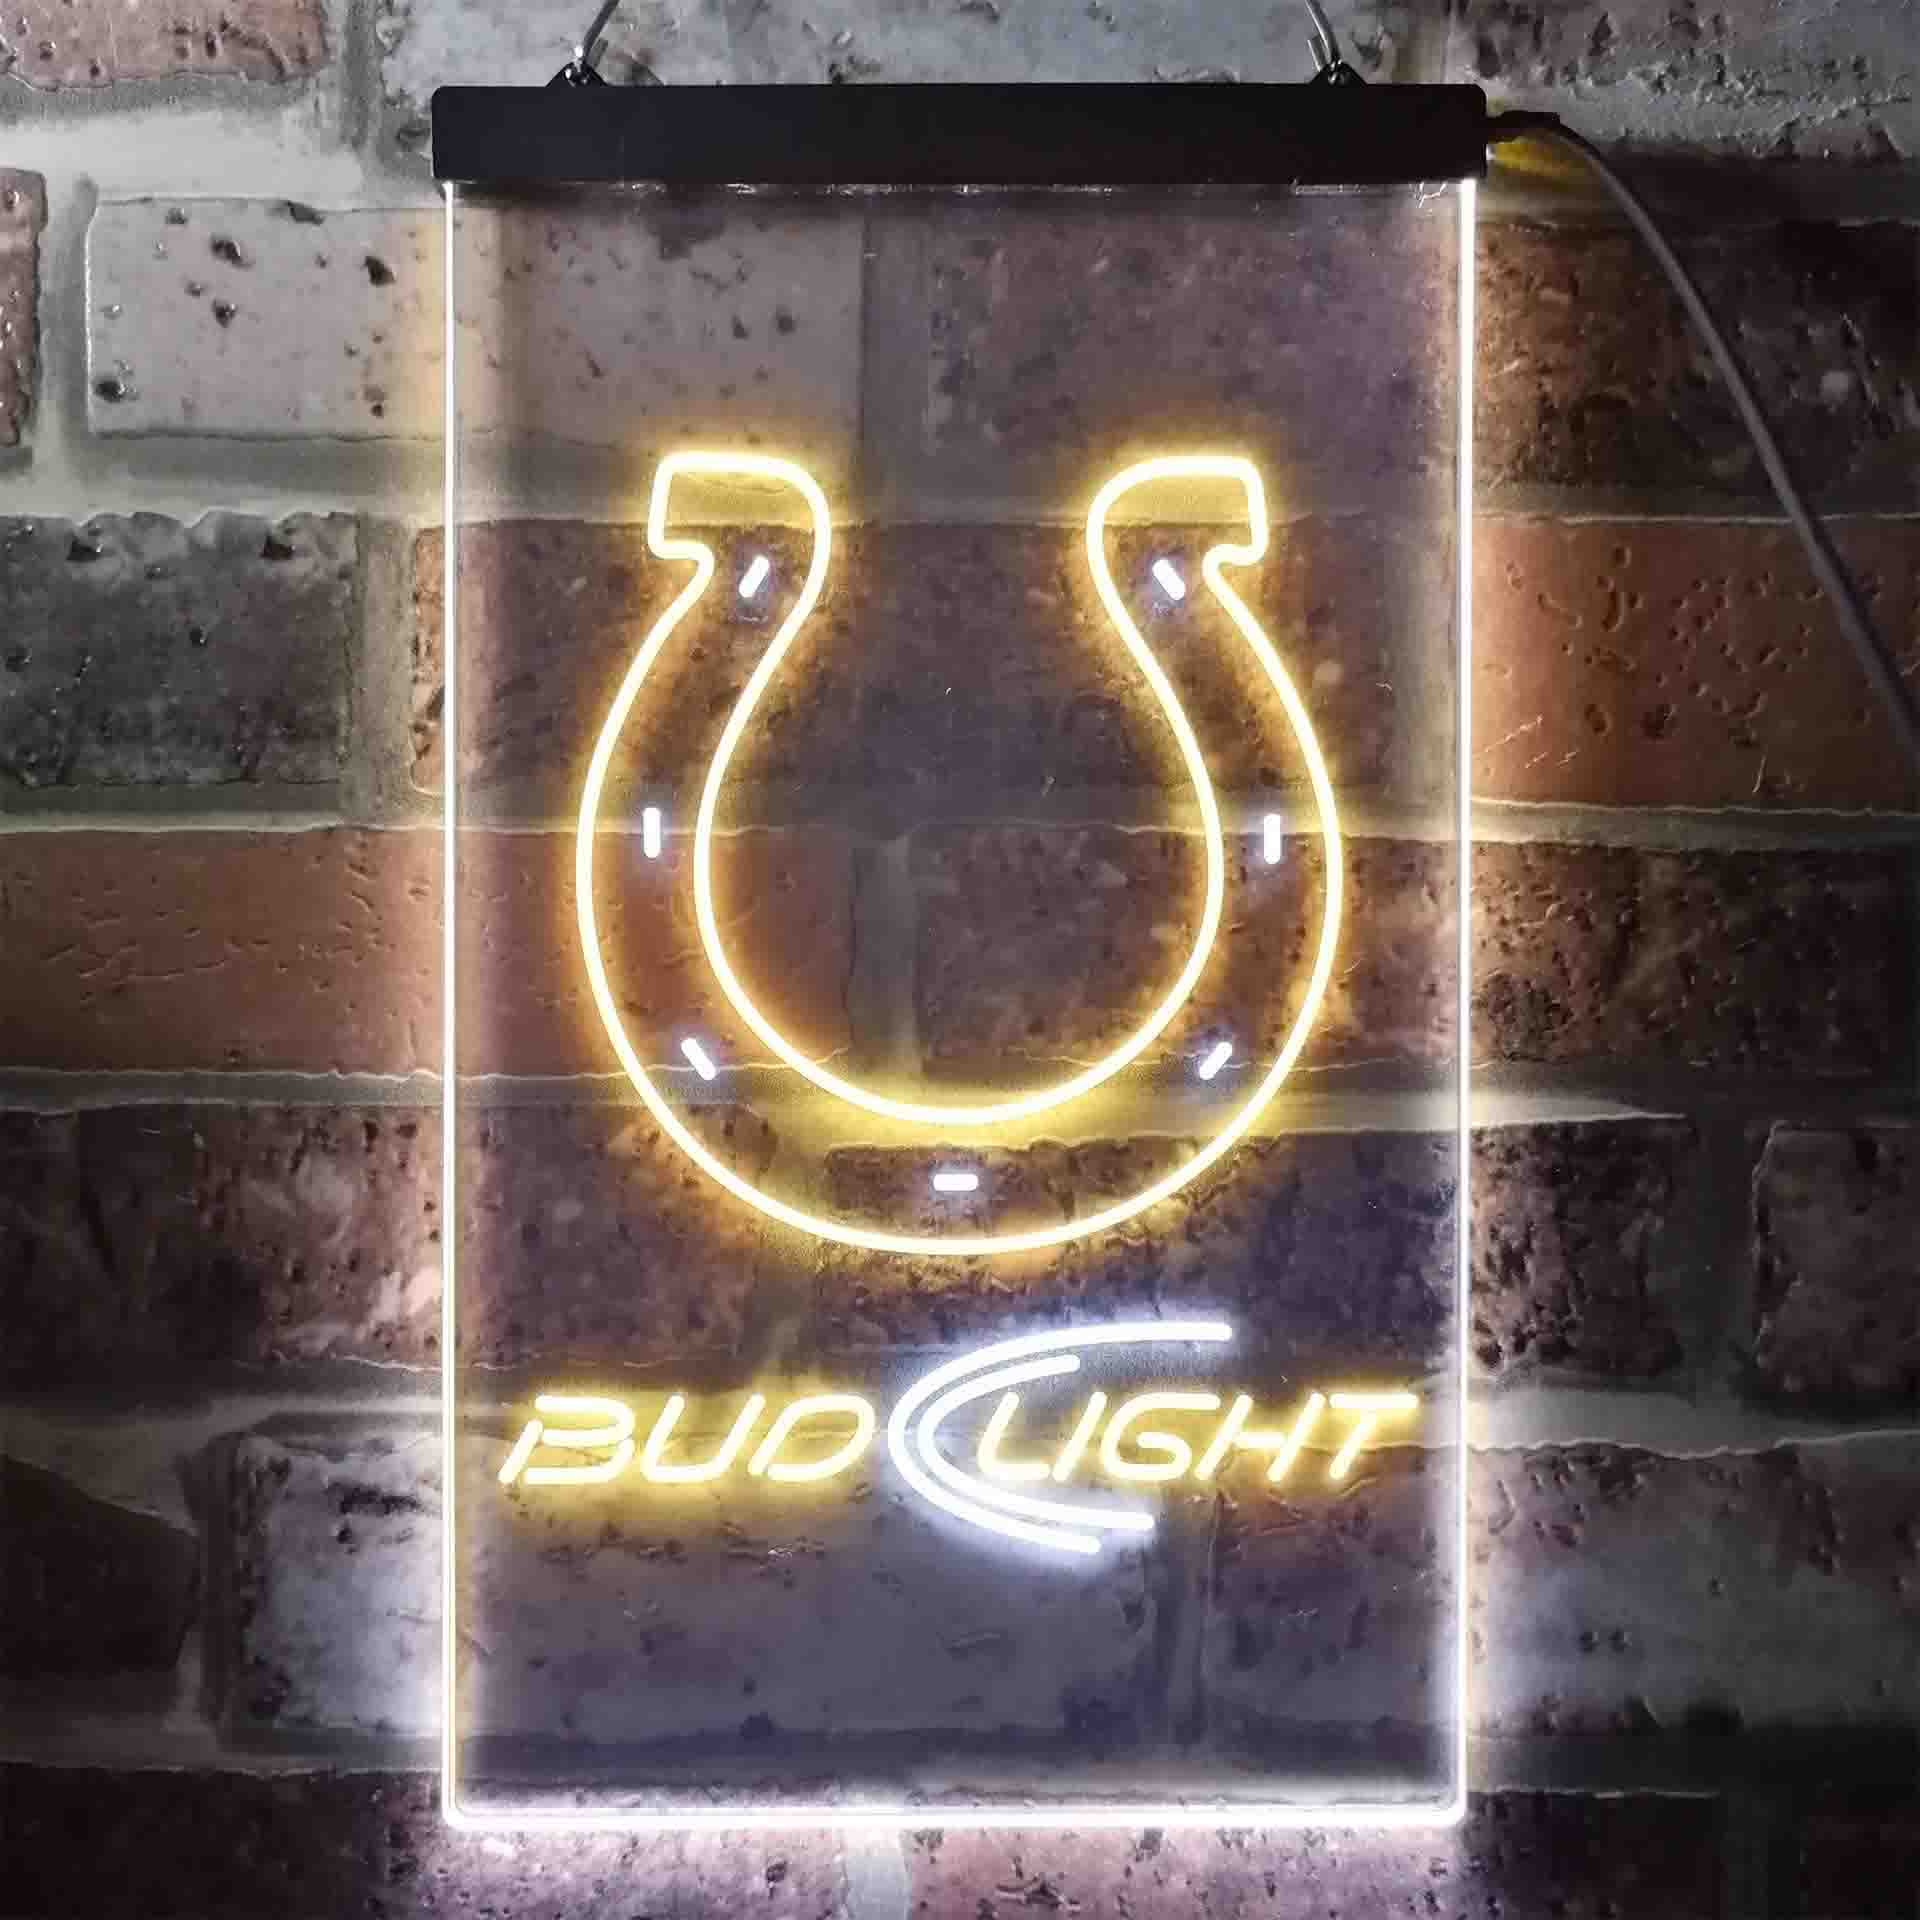 Bud Light Indianapolis Colts Dual Color LED Neon Sign ProLedSign